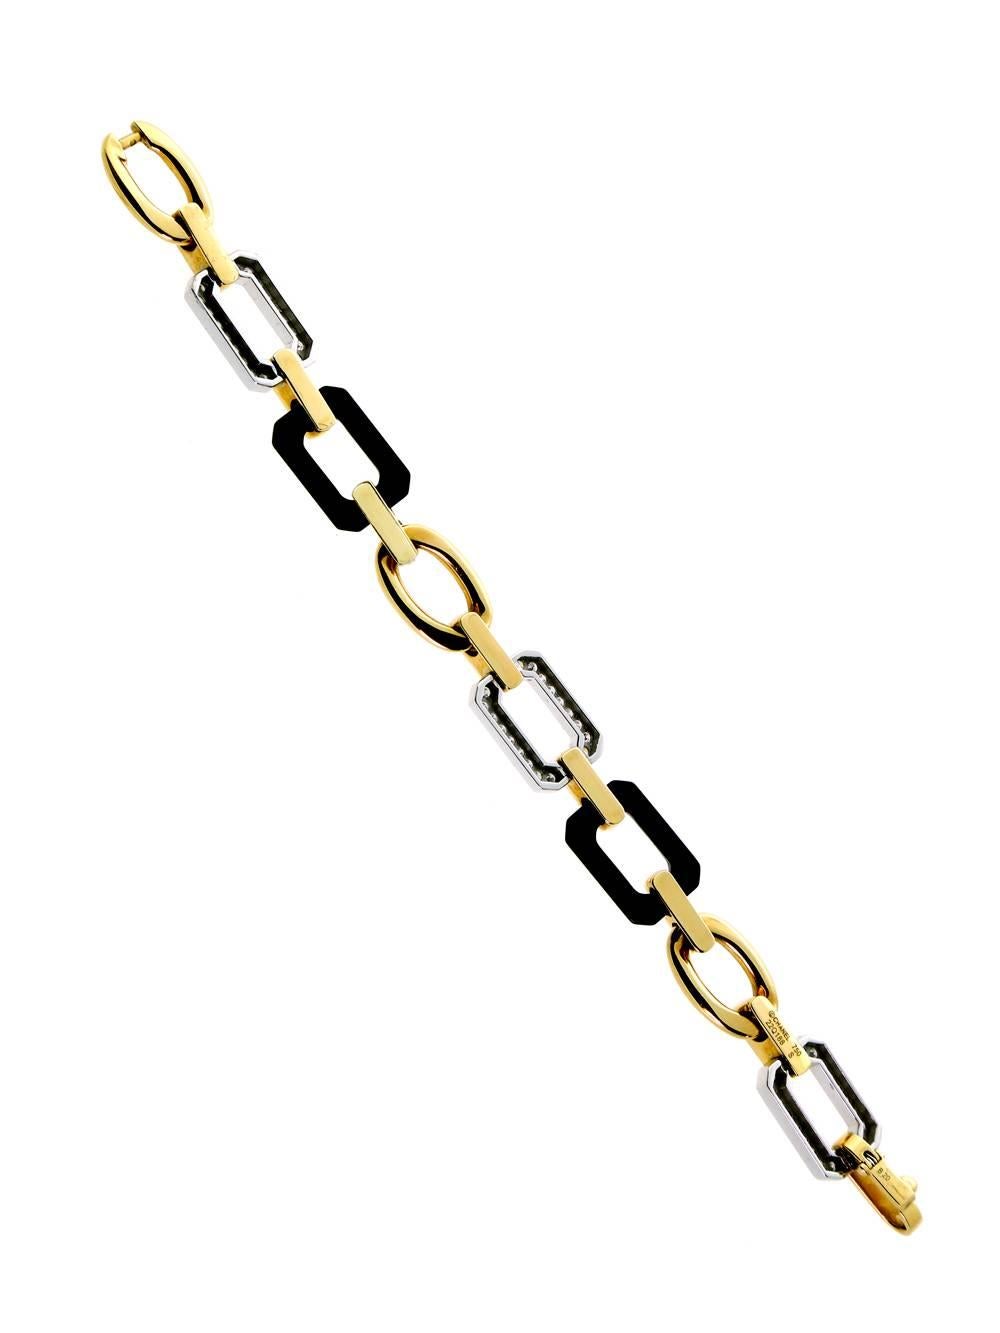 A chic Chanel bracelet in 18k yellow gold, onyx and diamonds (1ct appx) unite in this stylish bracelet. It's classic chain design delivers a touch of tradition.

Weight: 31.2 Grams
Length: 7 Inches
Dimensions: 12mm wide (.47